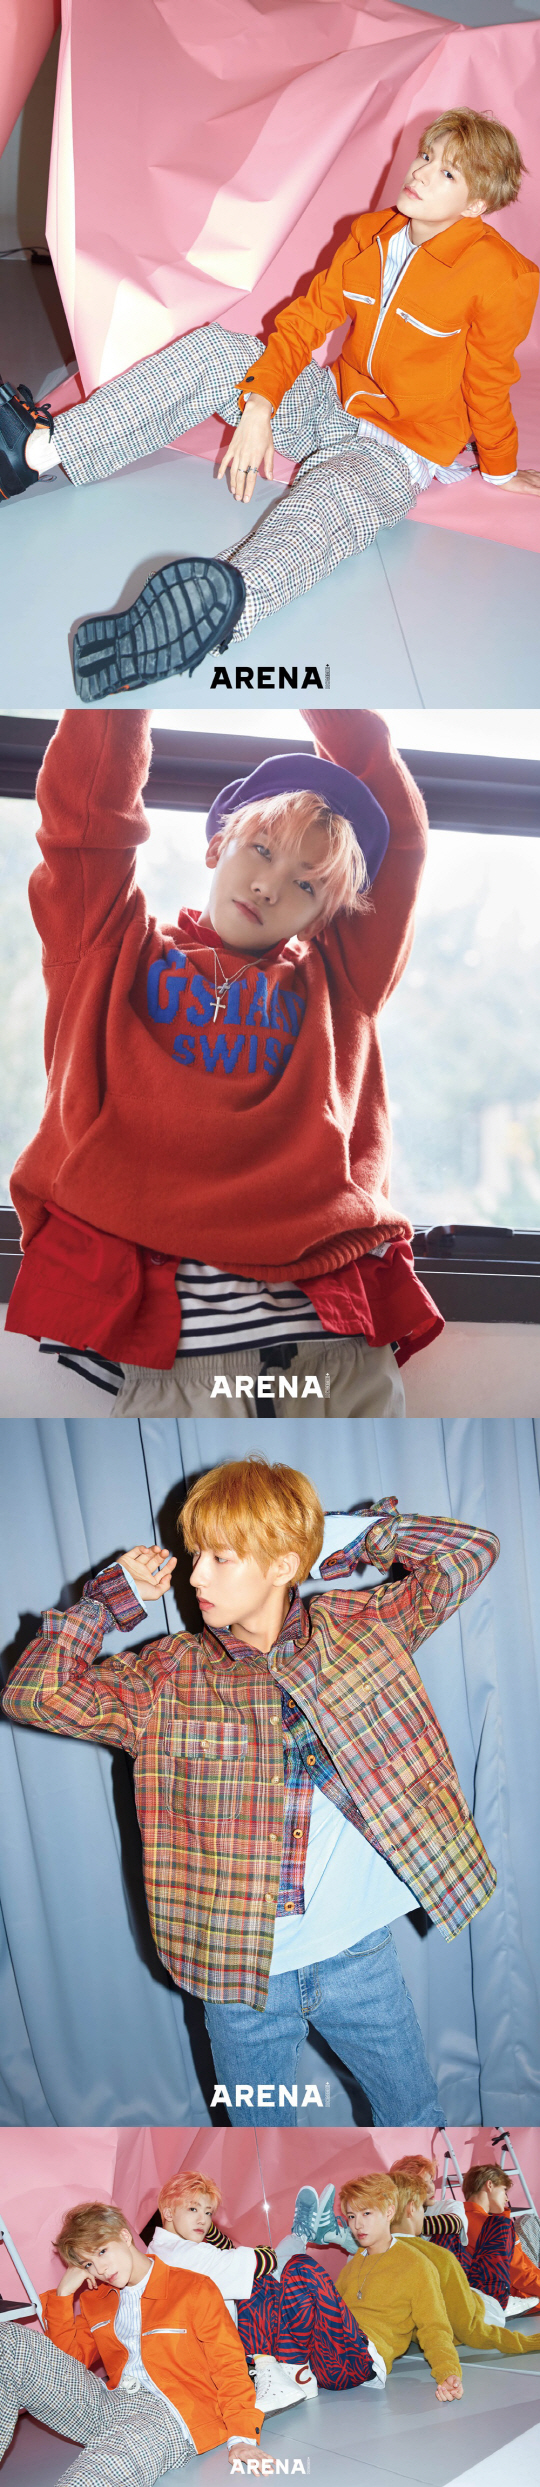 NCT Jeno - Jaemin - Runzin flaunted extraordinary visualsTV Land Favorite Fashion Plate - Male Award The September issue of Arena Homme Plus contains a picture of three NCTs.In this picture, Jeno, Jaemin, and Runjun showed a pose and sense that were confident enough to be called Picture Artisan.In the pink space, the three members showed off the charm of colorful colors.Jeno and Jaemin Runjun, who laughed happily and filmed, said that they made the scene atmosphere cheerful with honest and funny talks in the following interview.Their wonderful pictures can be found in the September issue of Arena Homme Plus.